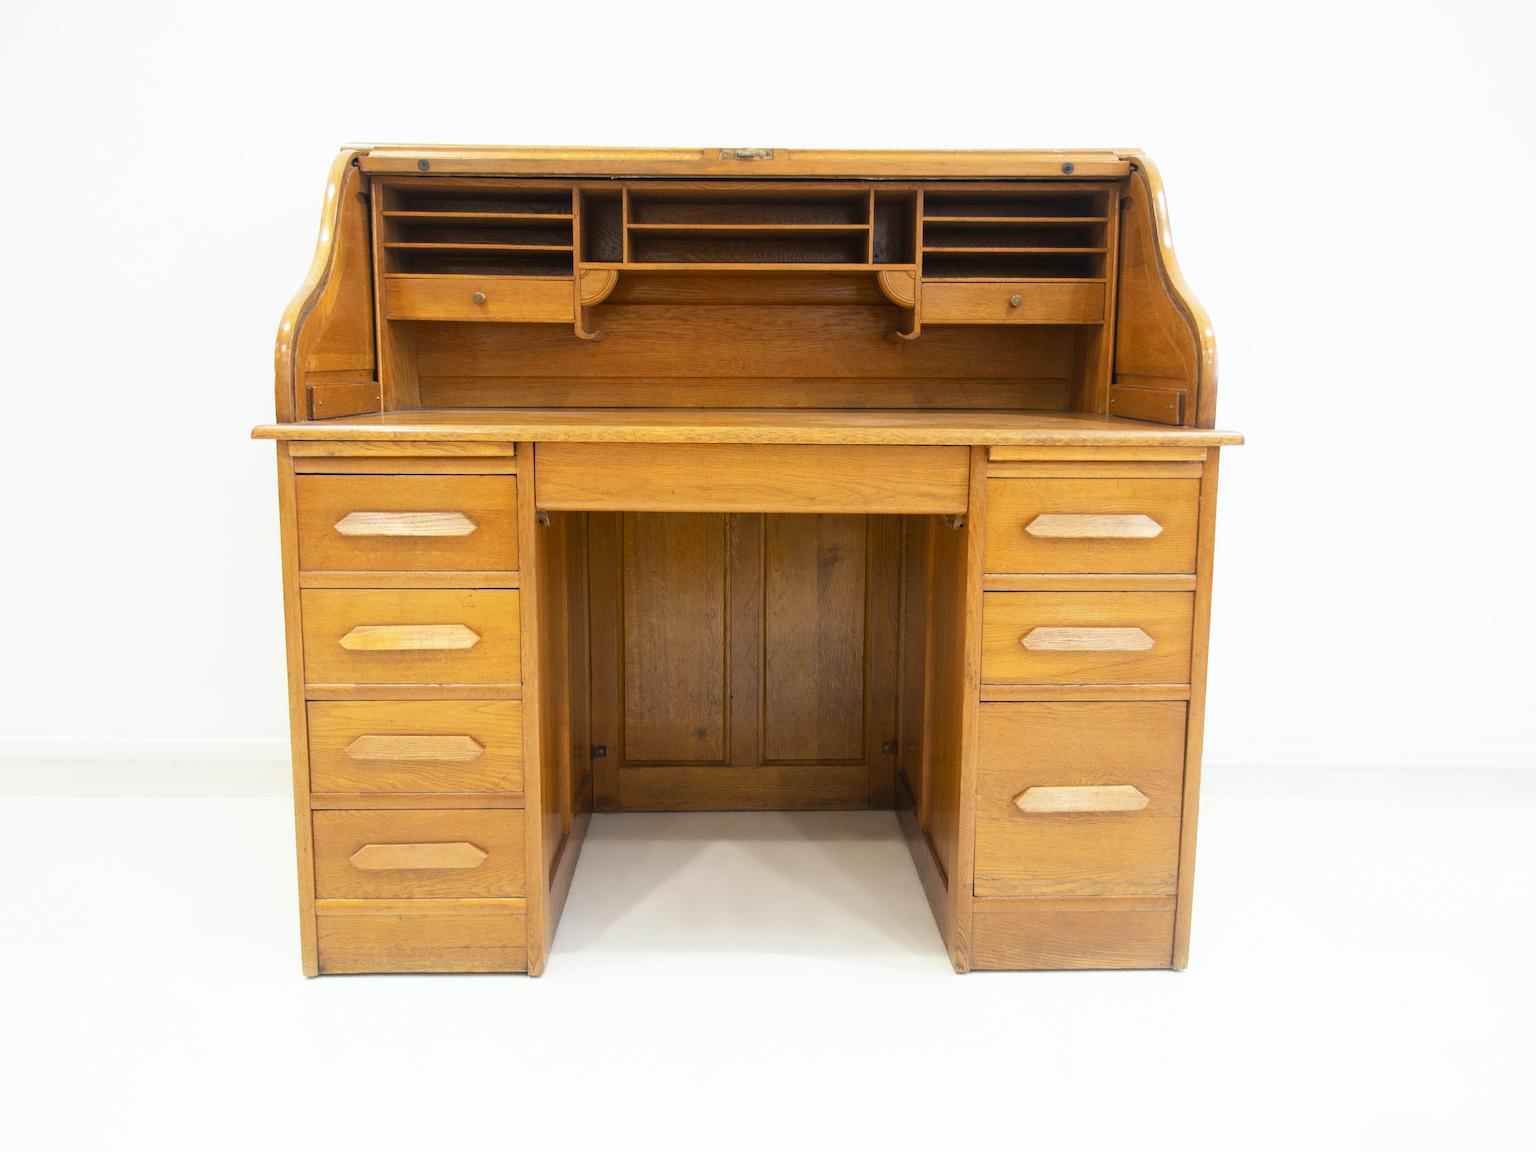 Oak secretary / writing desk from circa 1900's. Featuring a roll-up flap with underlying writing board, shelf interior and two drawers. Below the writing desk there are two pull-out boards and seven drawers. Key available.